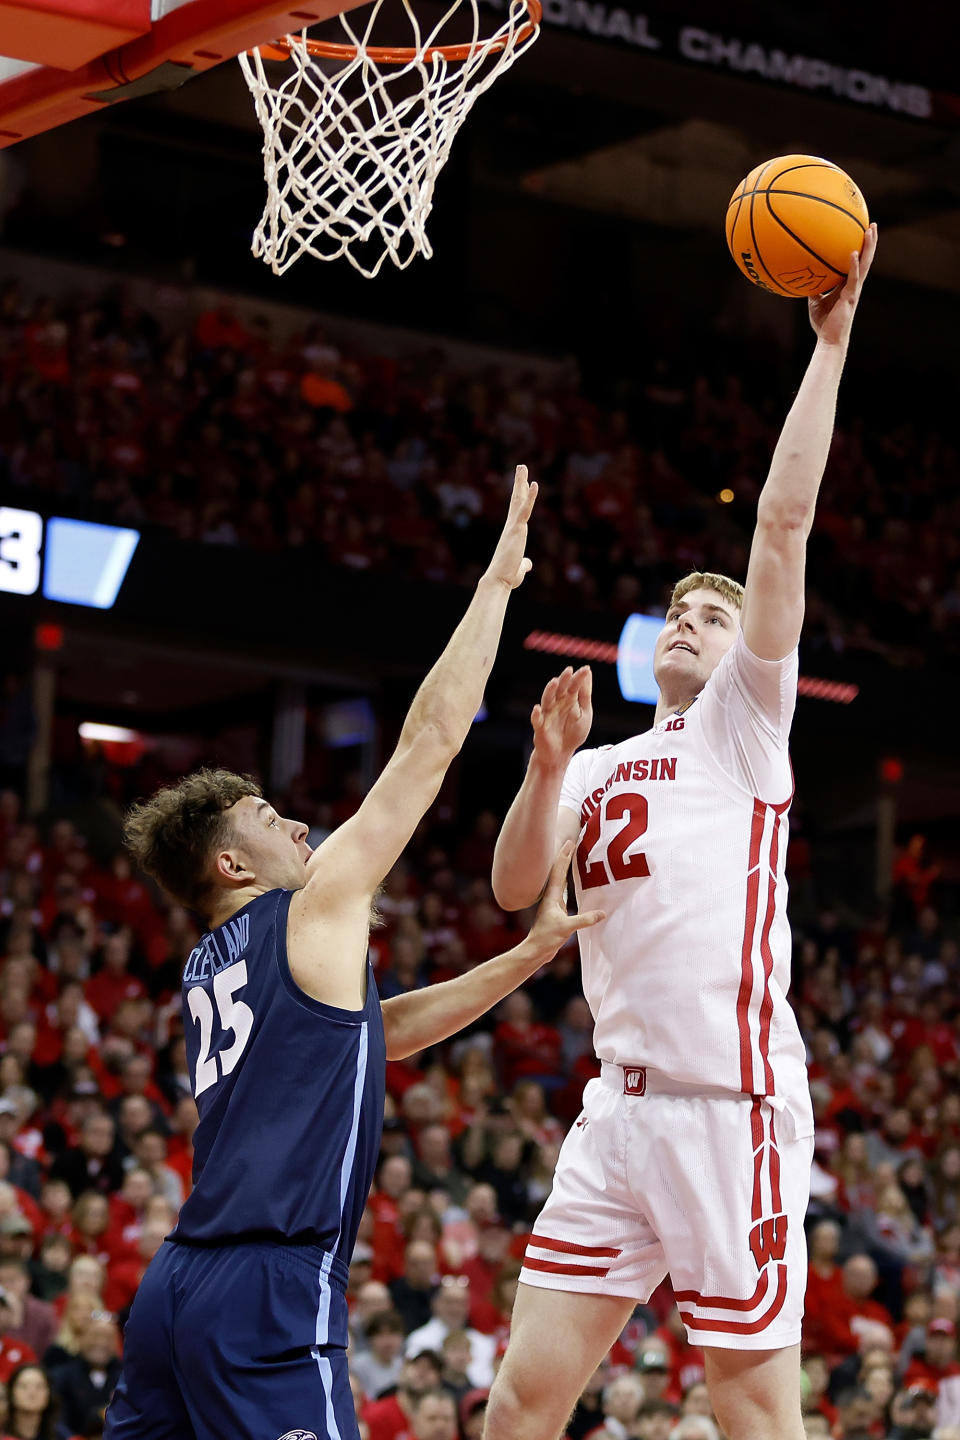 MADISON, WISCONSIN – MARCH 19: Steven Crowl #22 of the Wisconsin Badgers scores over Zach Cleveland #25 of the Liberty Flames during the first half in the second round of the NIT Men’s Basketball Tournament at Kohl Center on March 19, 2023 in Madison, Wisconsin. (Photo by John Fisher/Getty Images)